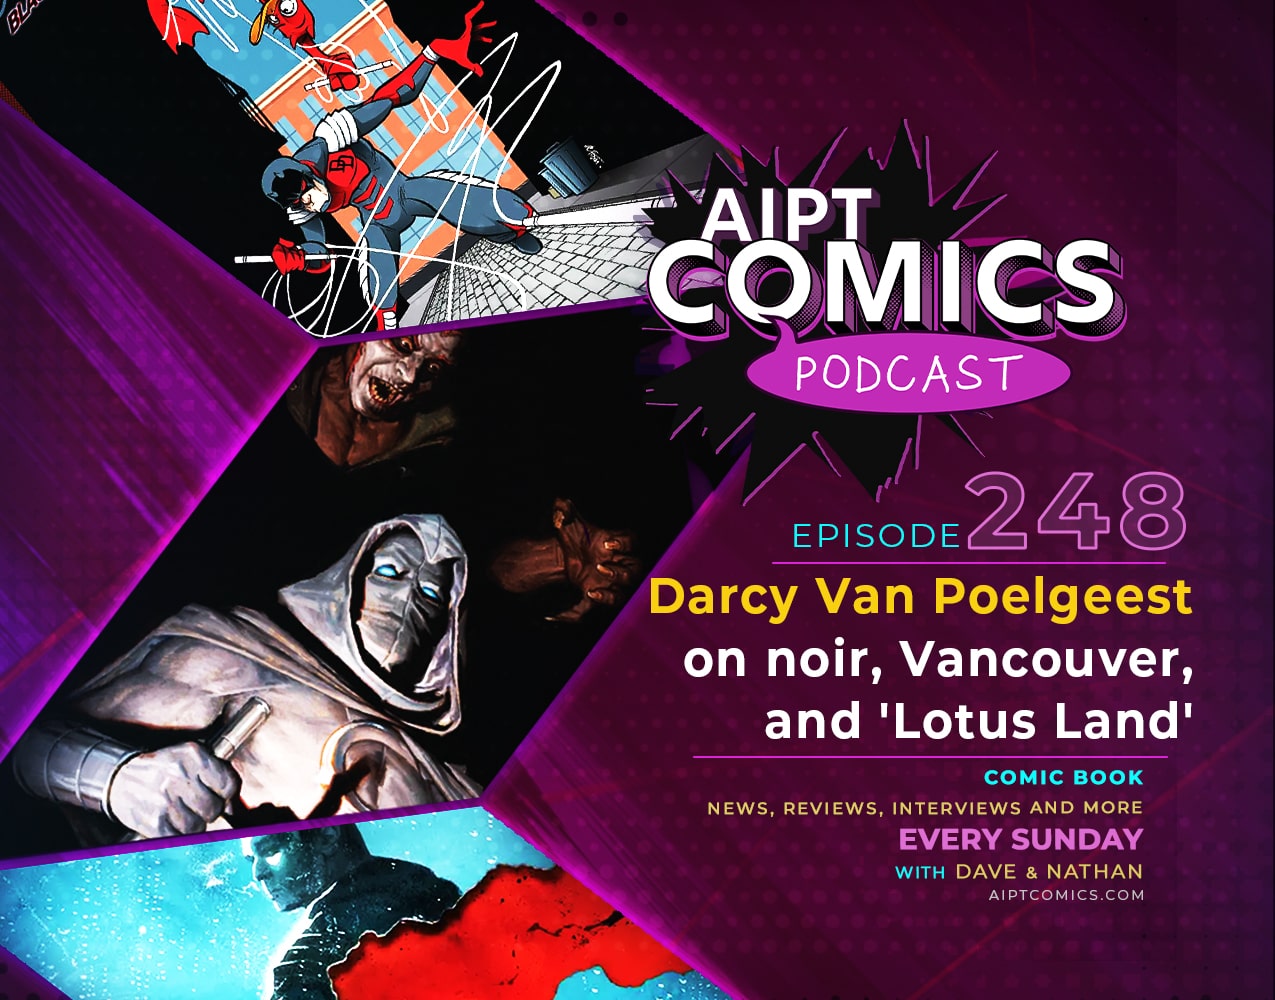 AIPT Comics Podcast Episode 248: Darcy Van Poelgeest on noir, Vancouver, and 'Lotus Land'